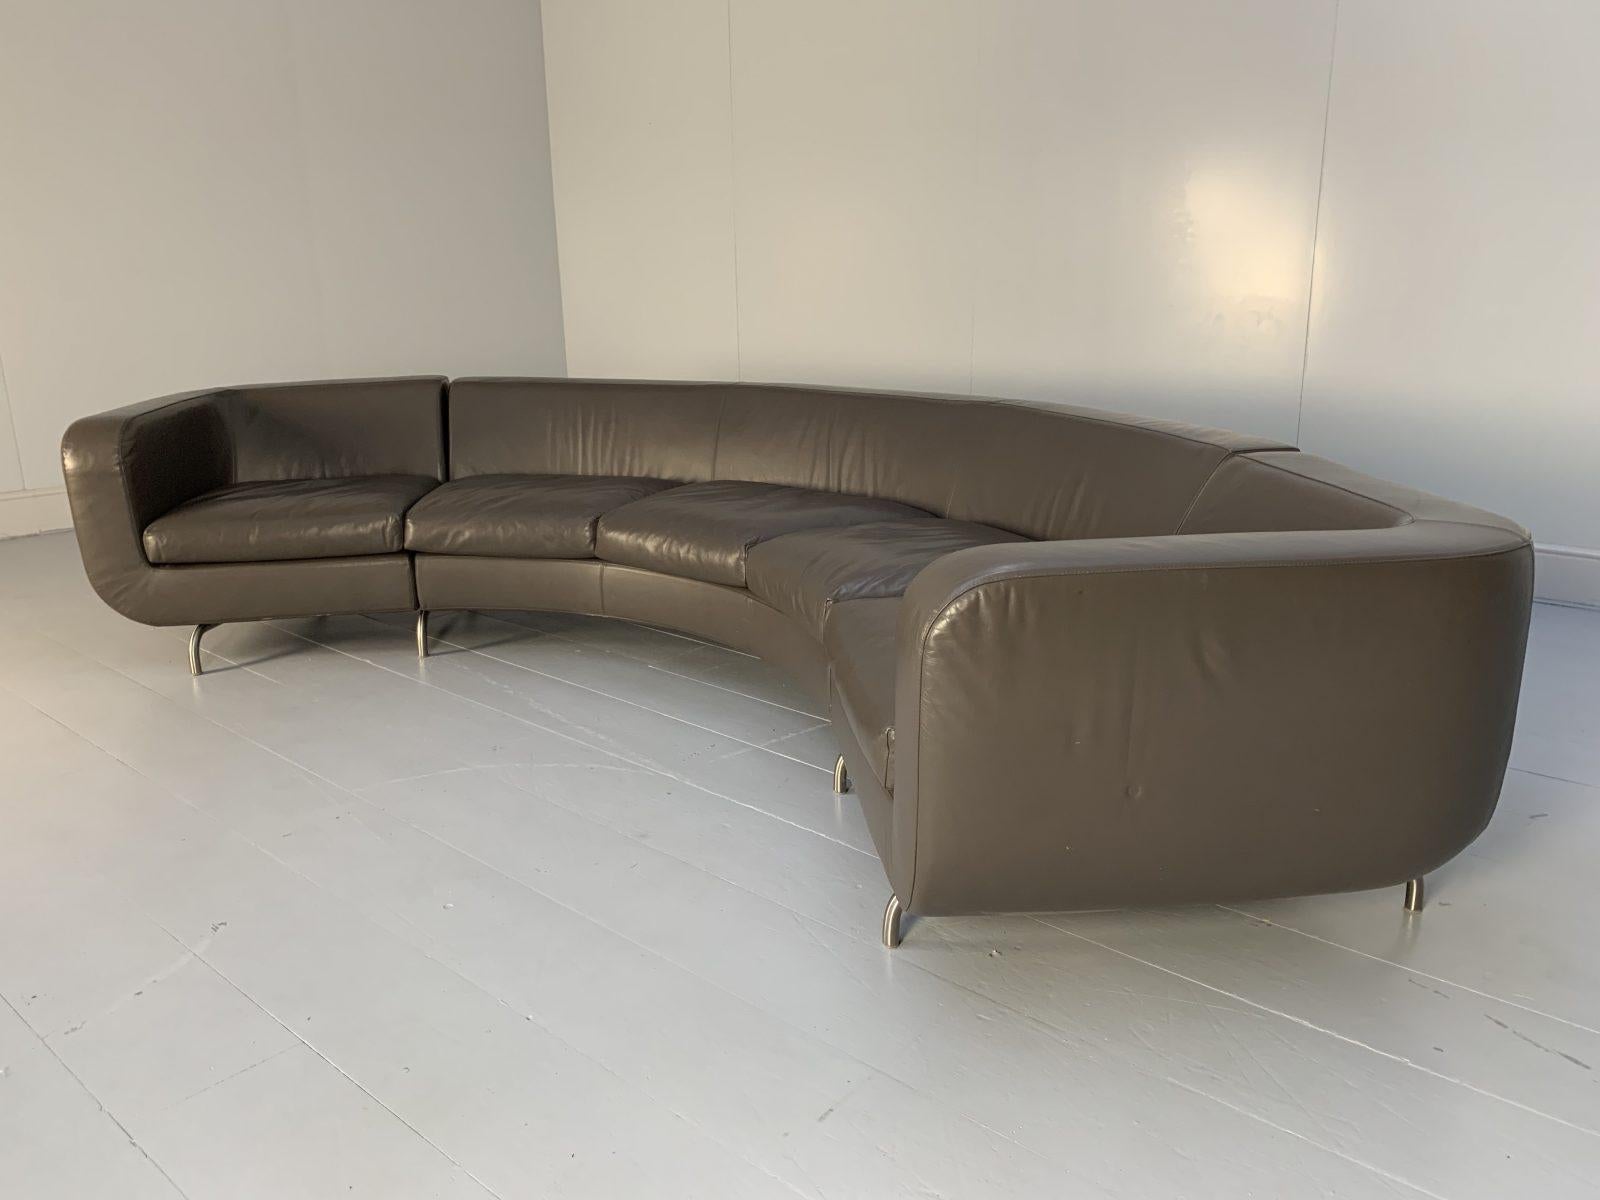 This is a superb, Minotti “Dubuffet” 5-Seat “Composition B” Curved Sofa, dressed in a peerless, top-grade “Pelle” Leather in Dark-Grey, and with Satin-Metal base and legs.

In a world of temporary pleasures, Minotti create beautiful furniture that